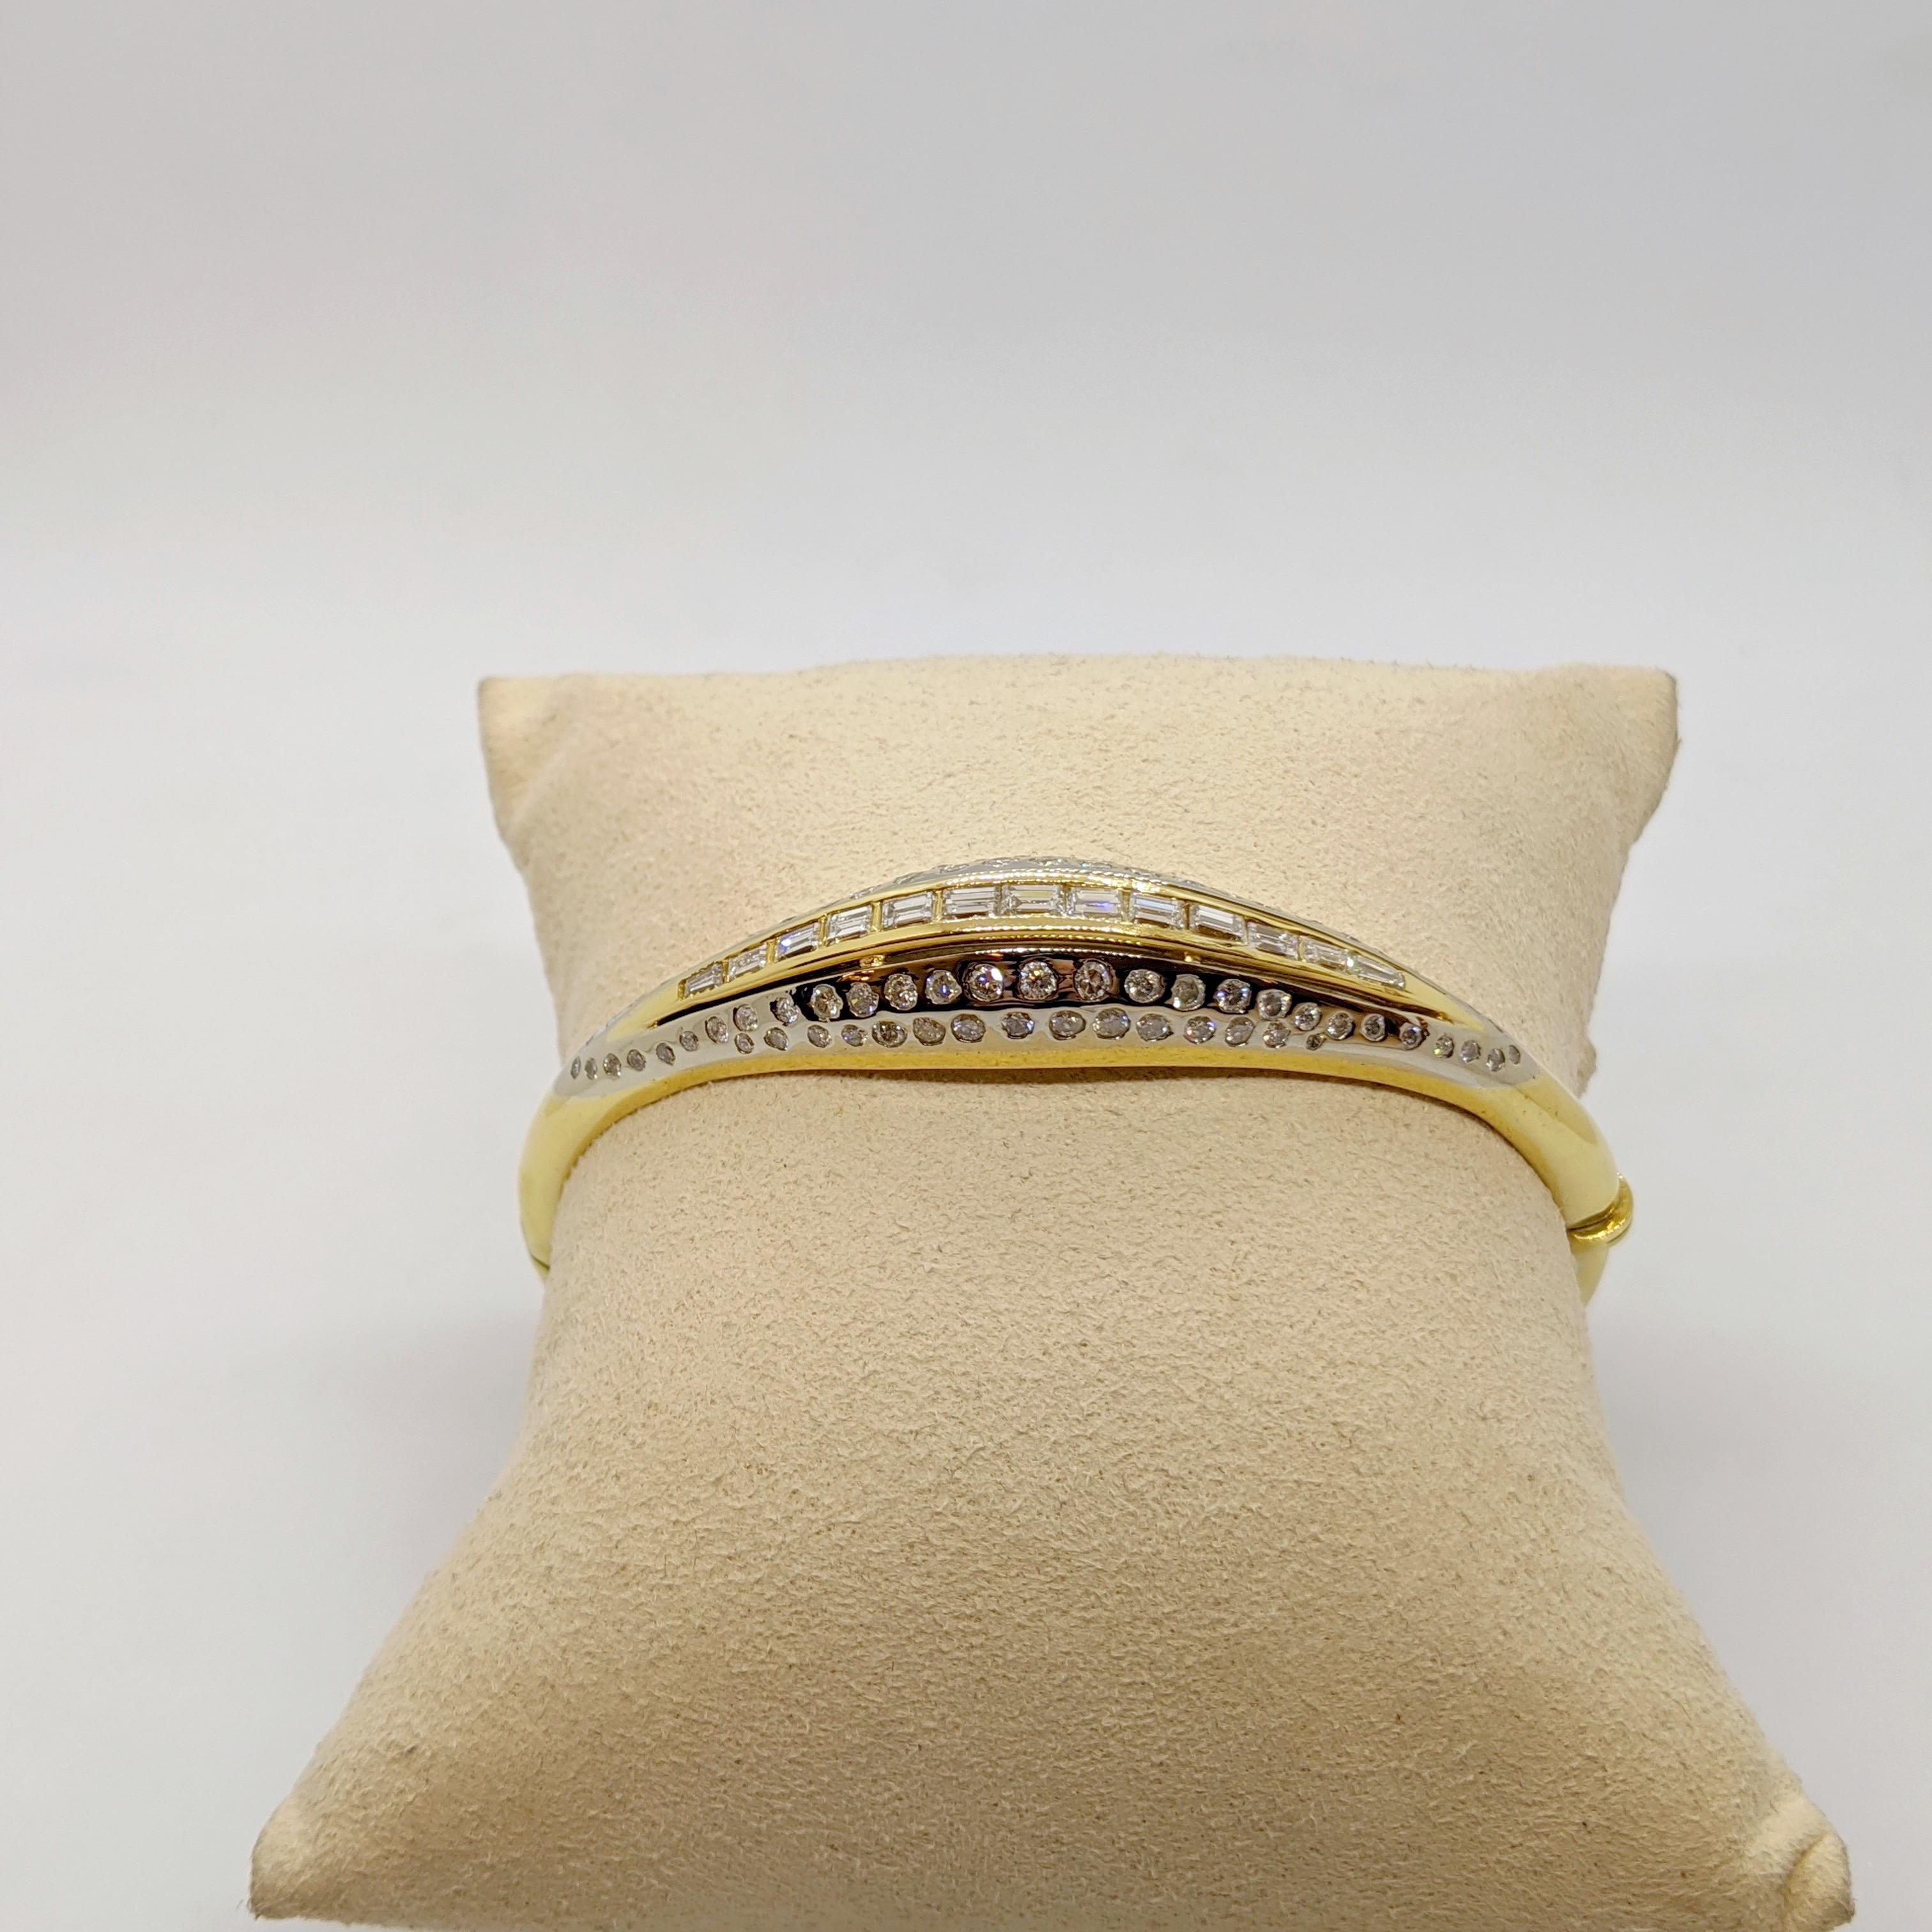 A beautiful and very easy to wear Diamond bangle bracelet. 
This bracelet is designed in 18 karat yellow gold. The top half of the bracelet is bombe'. It has round brilliant cut Diamonds sprinkled into an 18 karat white gold section. The middle